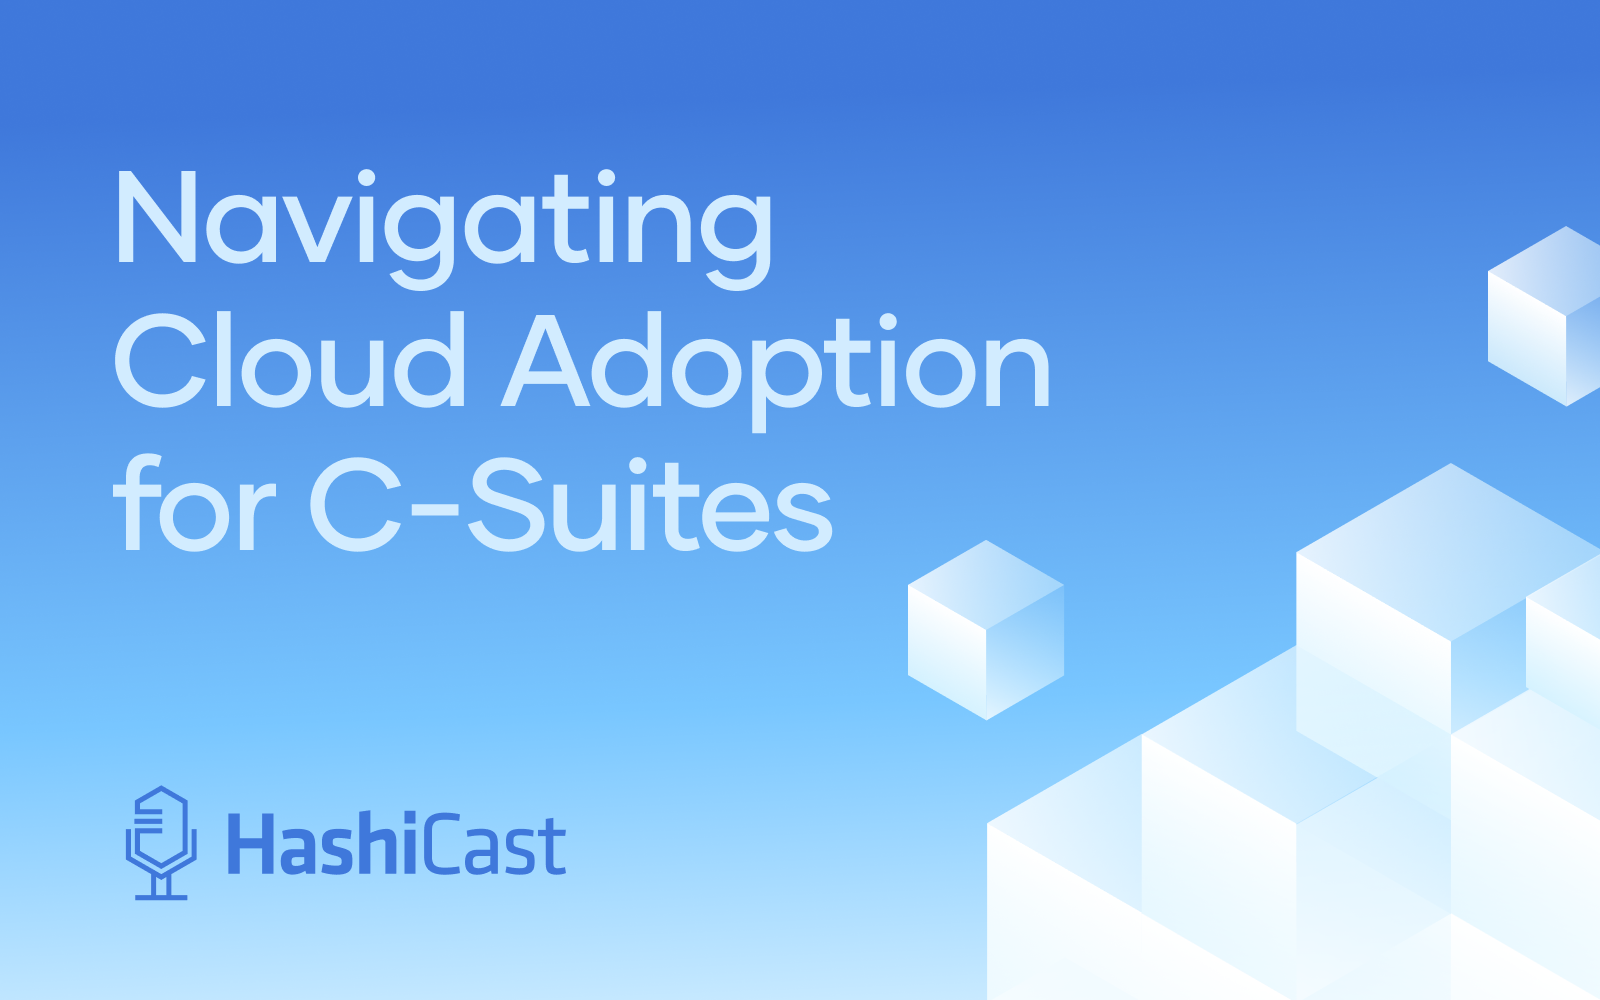 Introducing HashiCast: Navigating the Cloud for C-Suites